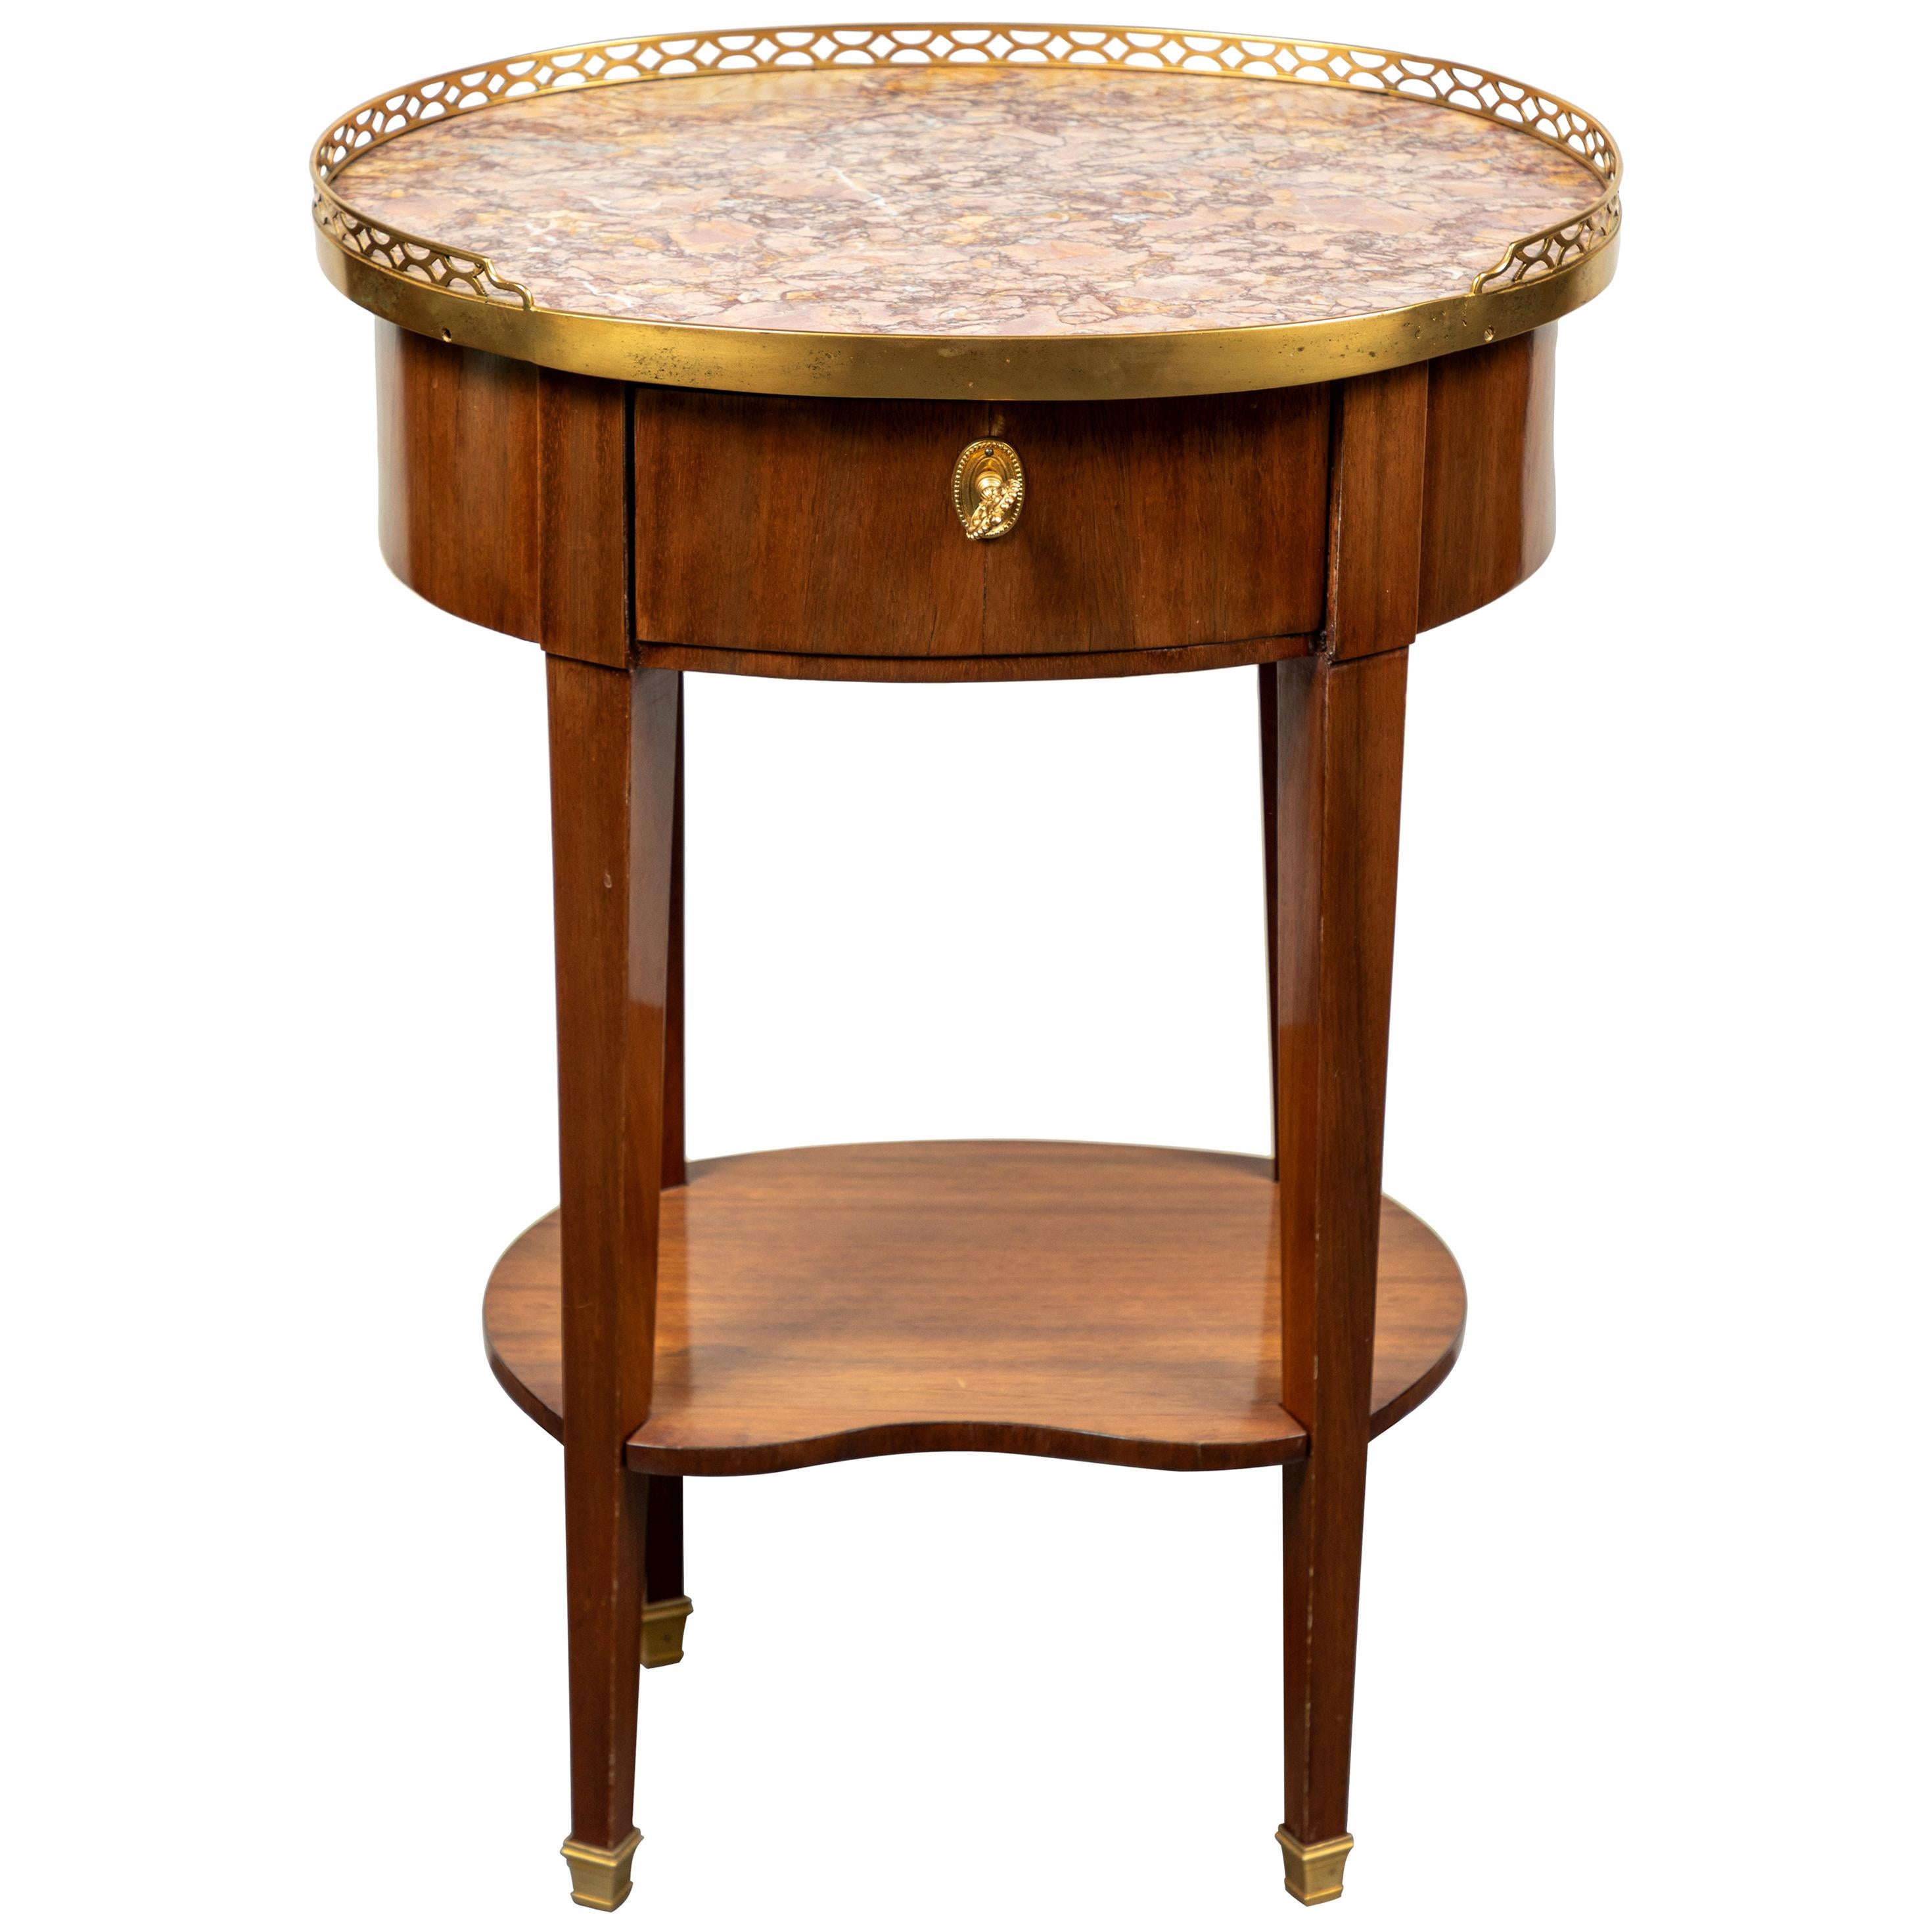 Period, Oval Side Table For Sale